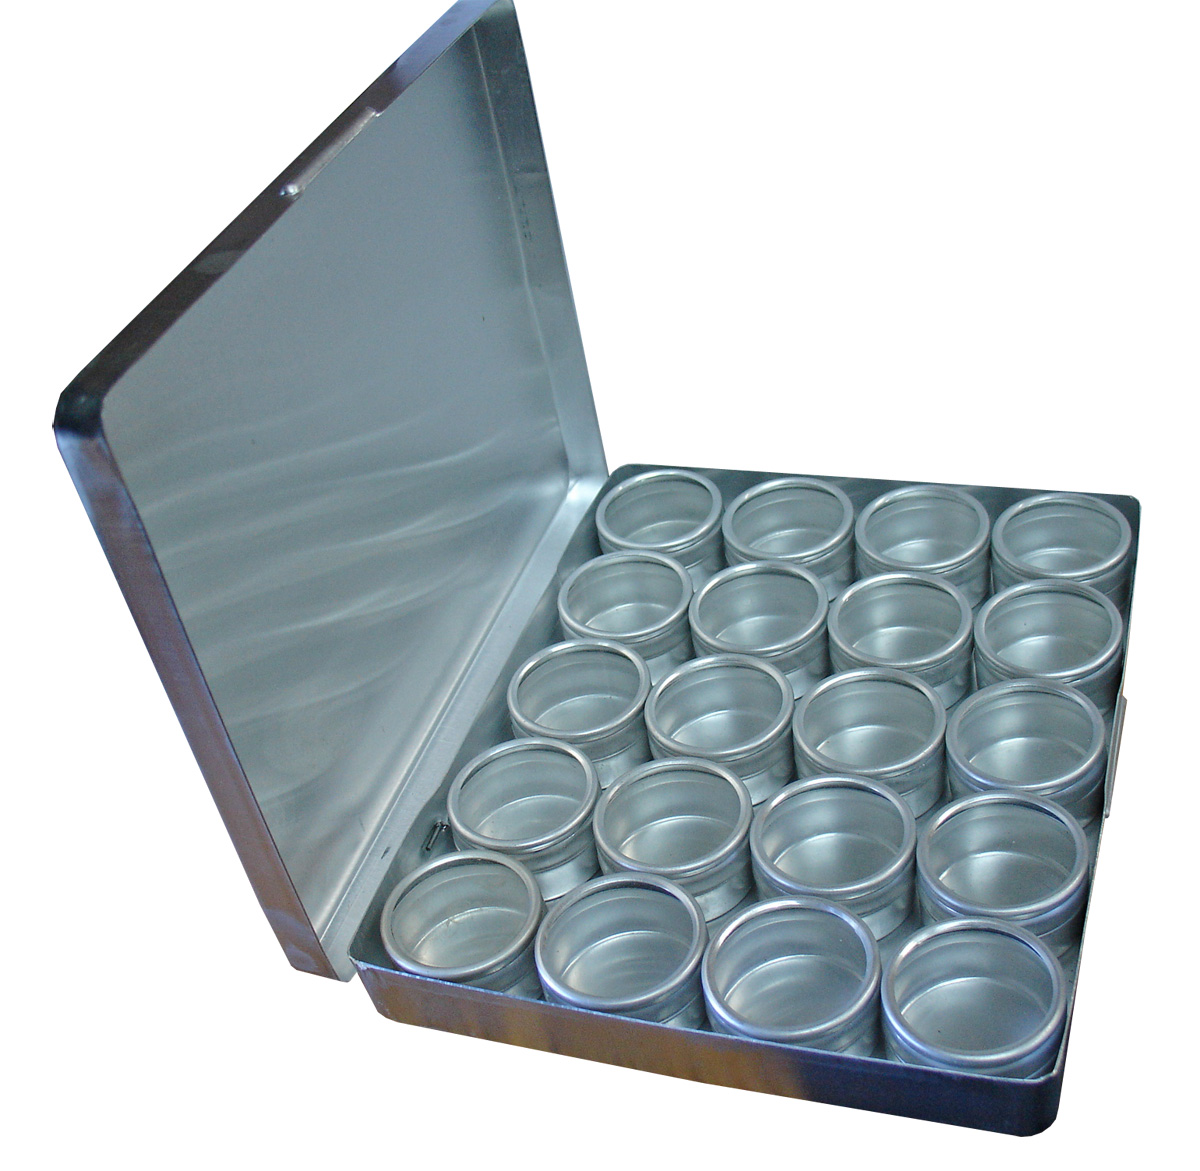 Aluminum Storage Box with 20 Containers - Ronell Clock Co.